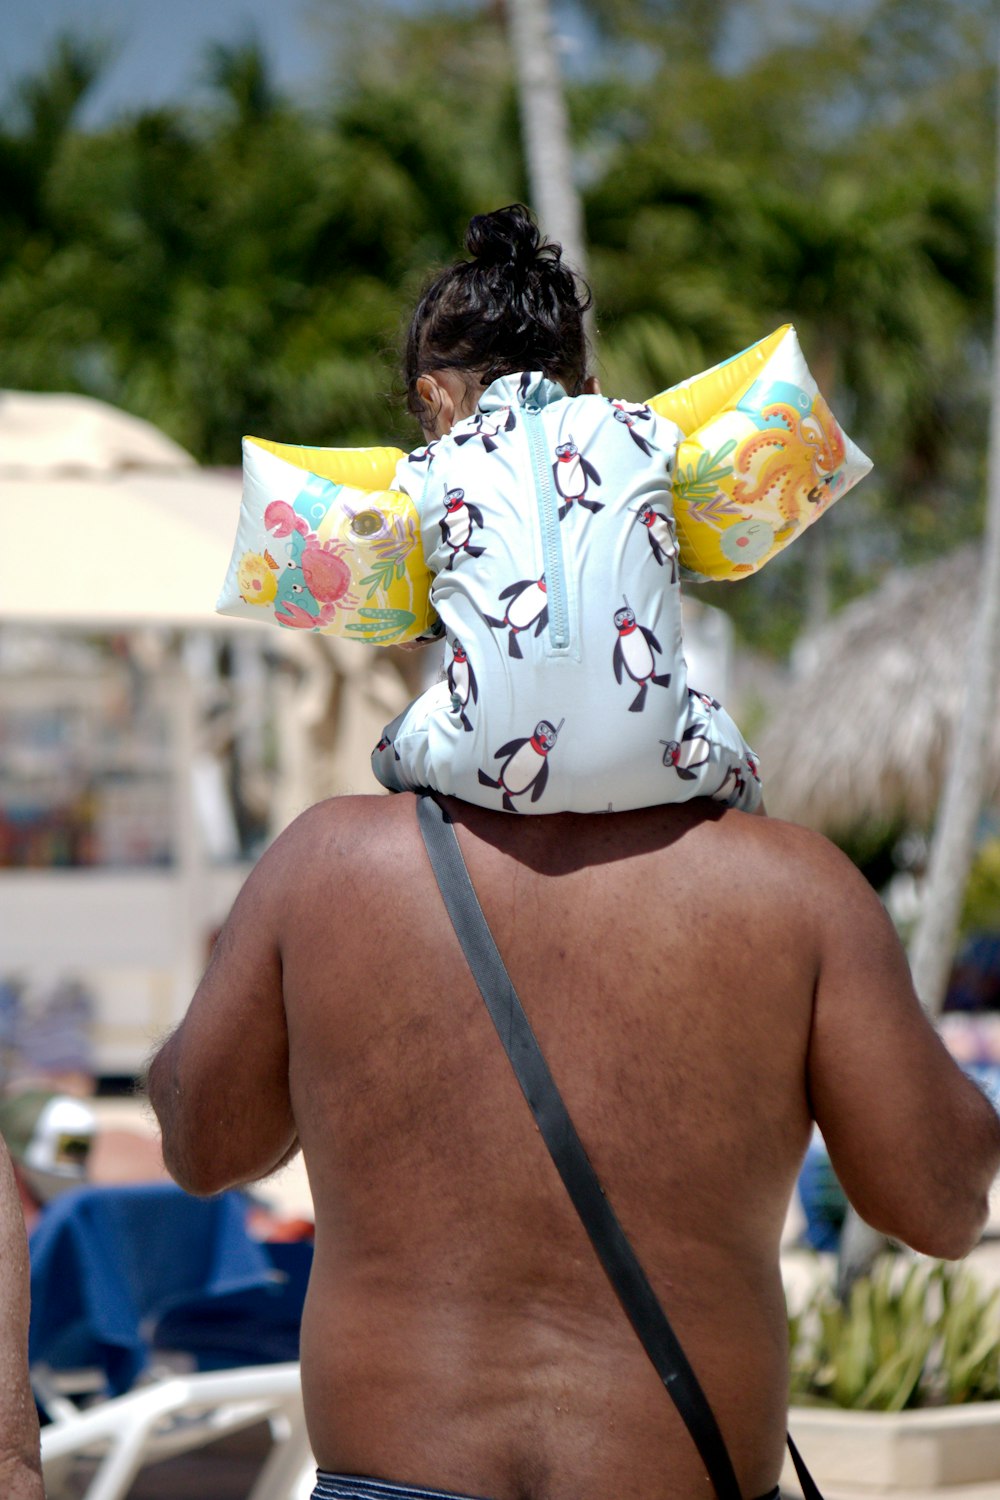 a man in a bathing suit carrying a child on his back